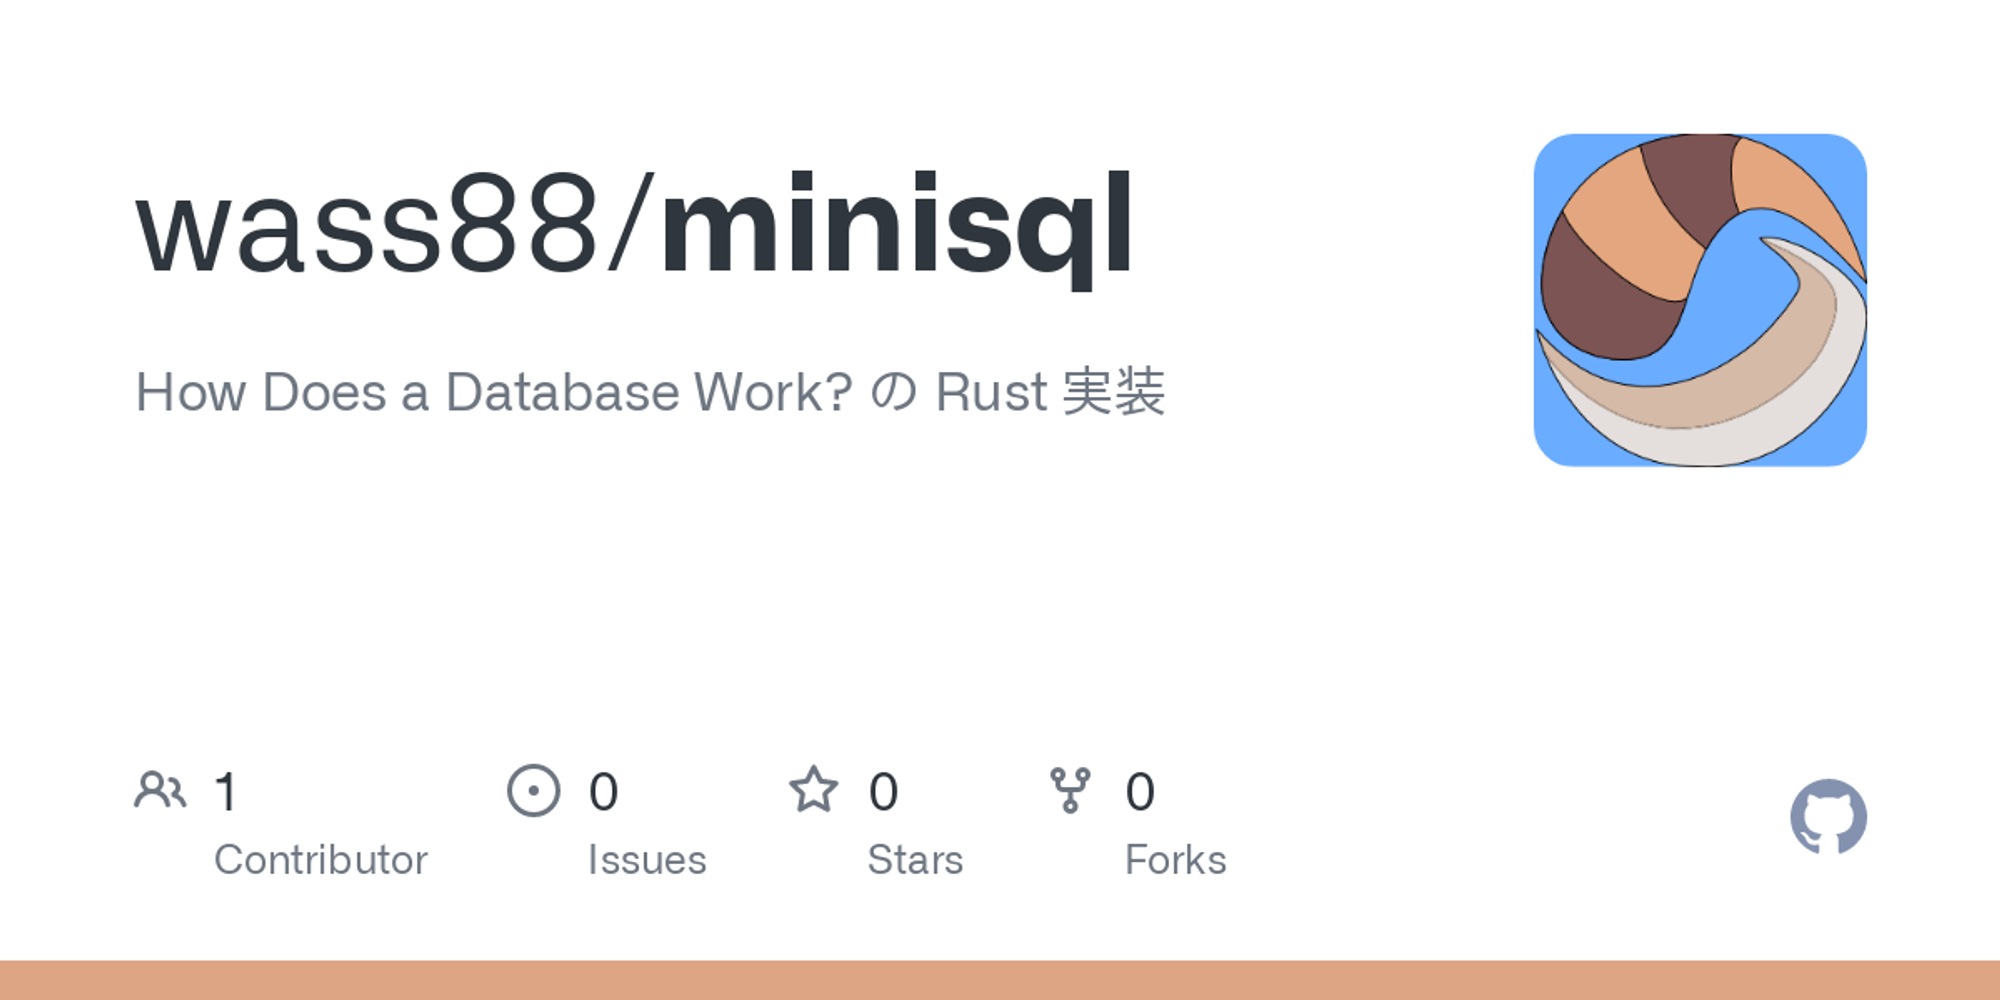 GitHub - wass88/minisql: How Does a Database Work? の Rust 実装